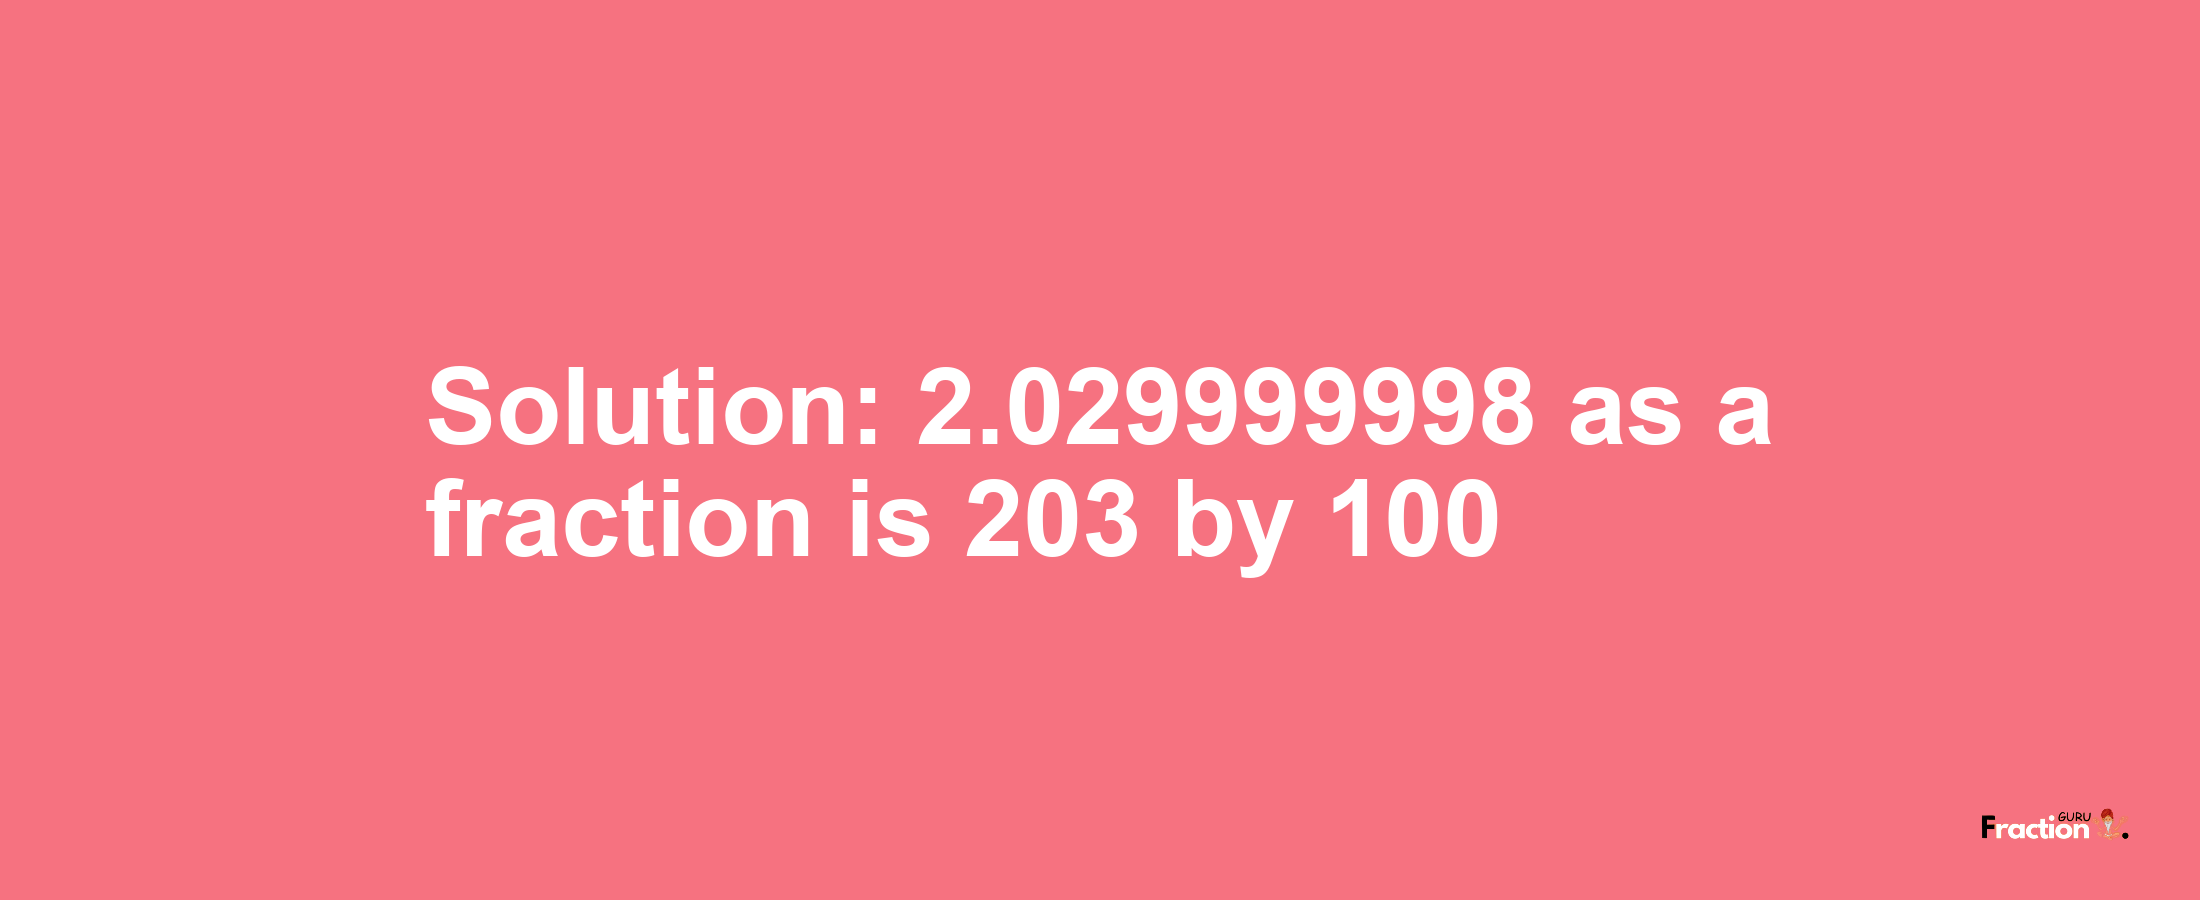 Solution:2.029999998 as a fraction is 203/100